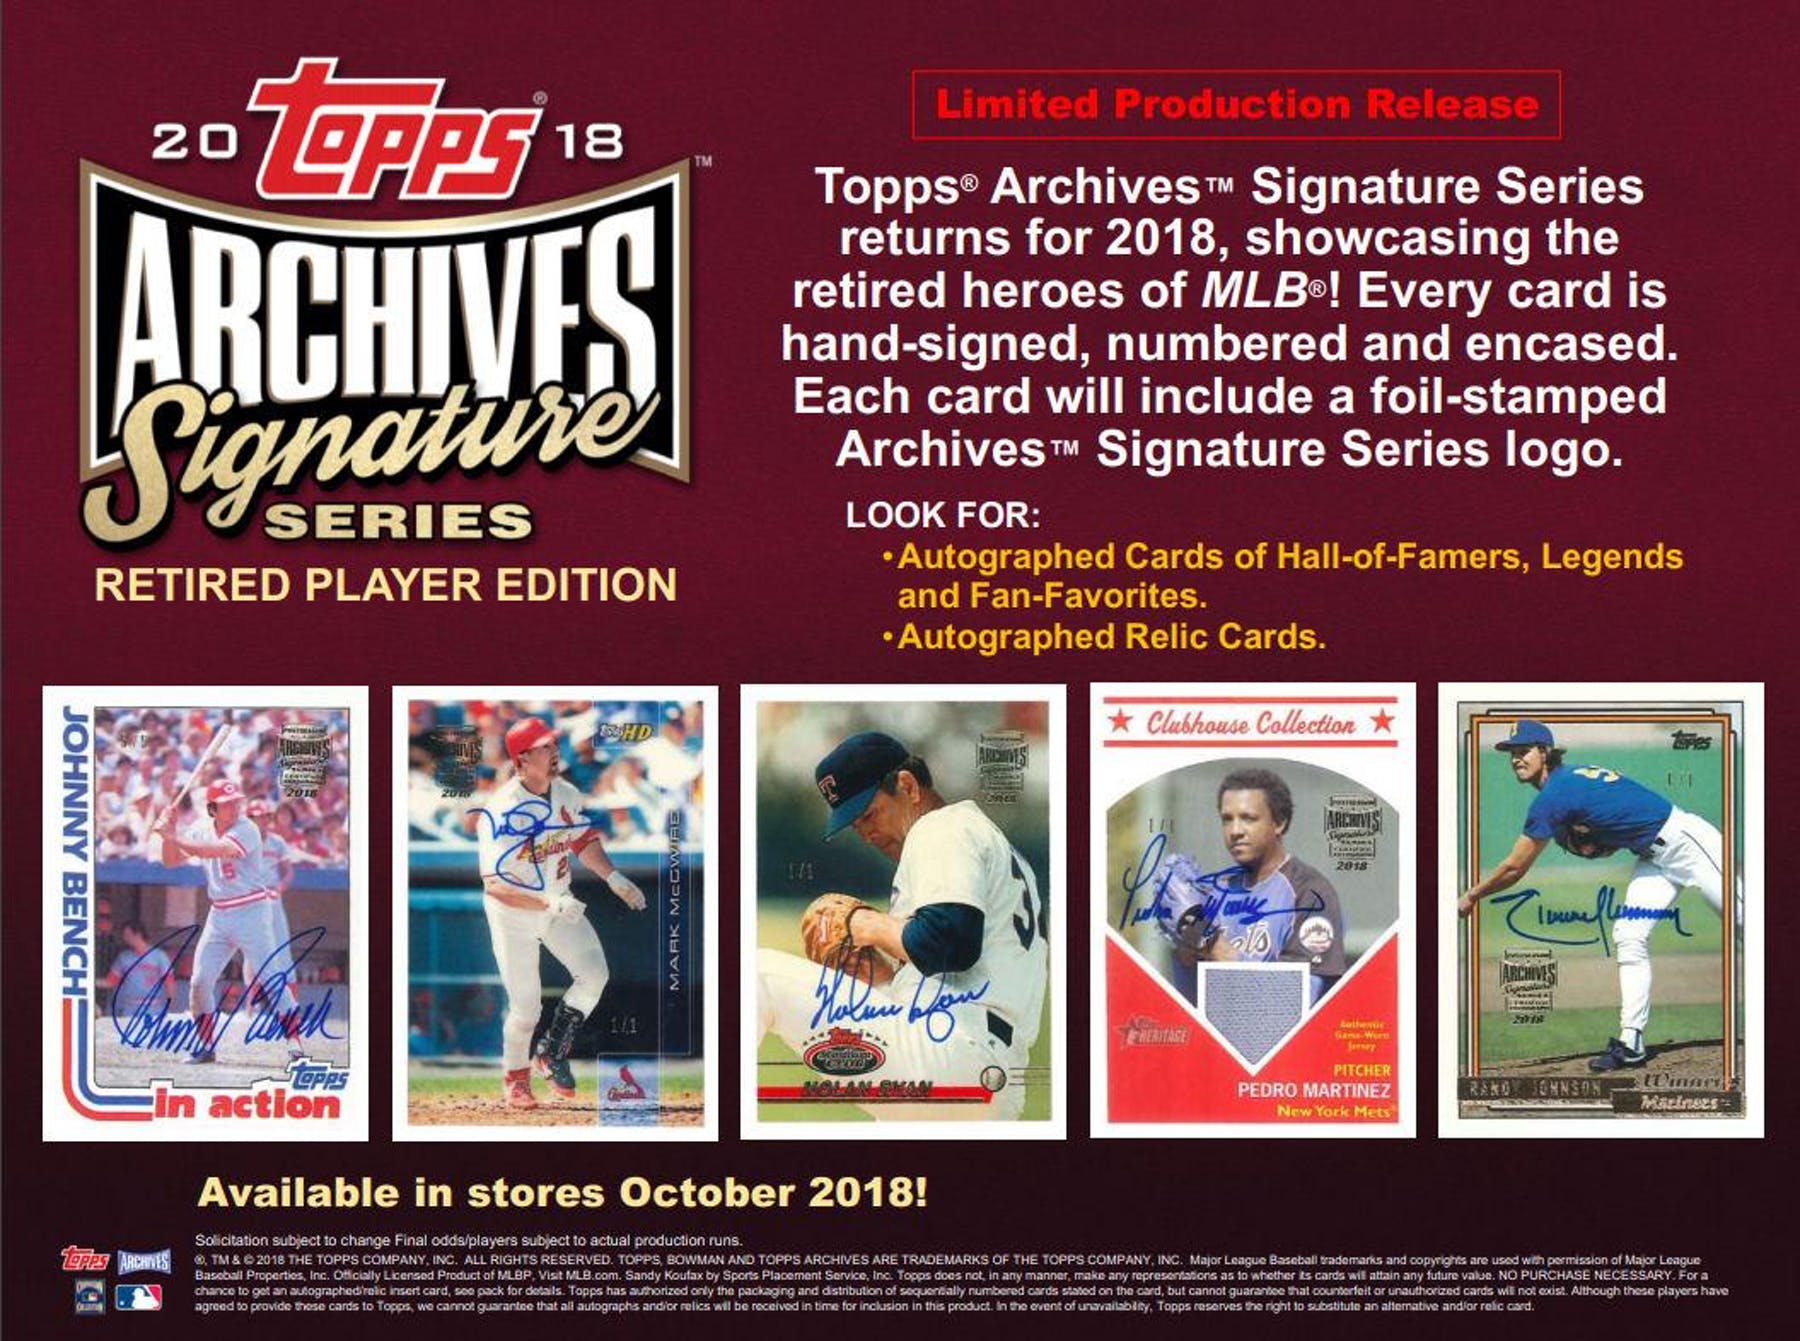 2018 Topps Archives Signature Series "Retired Player Edition" Baseball Hobby Box - BigBoi Cards